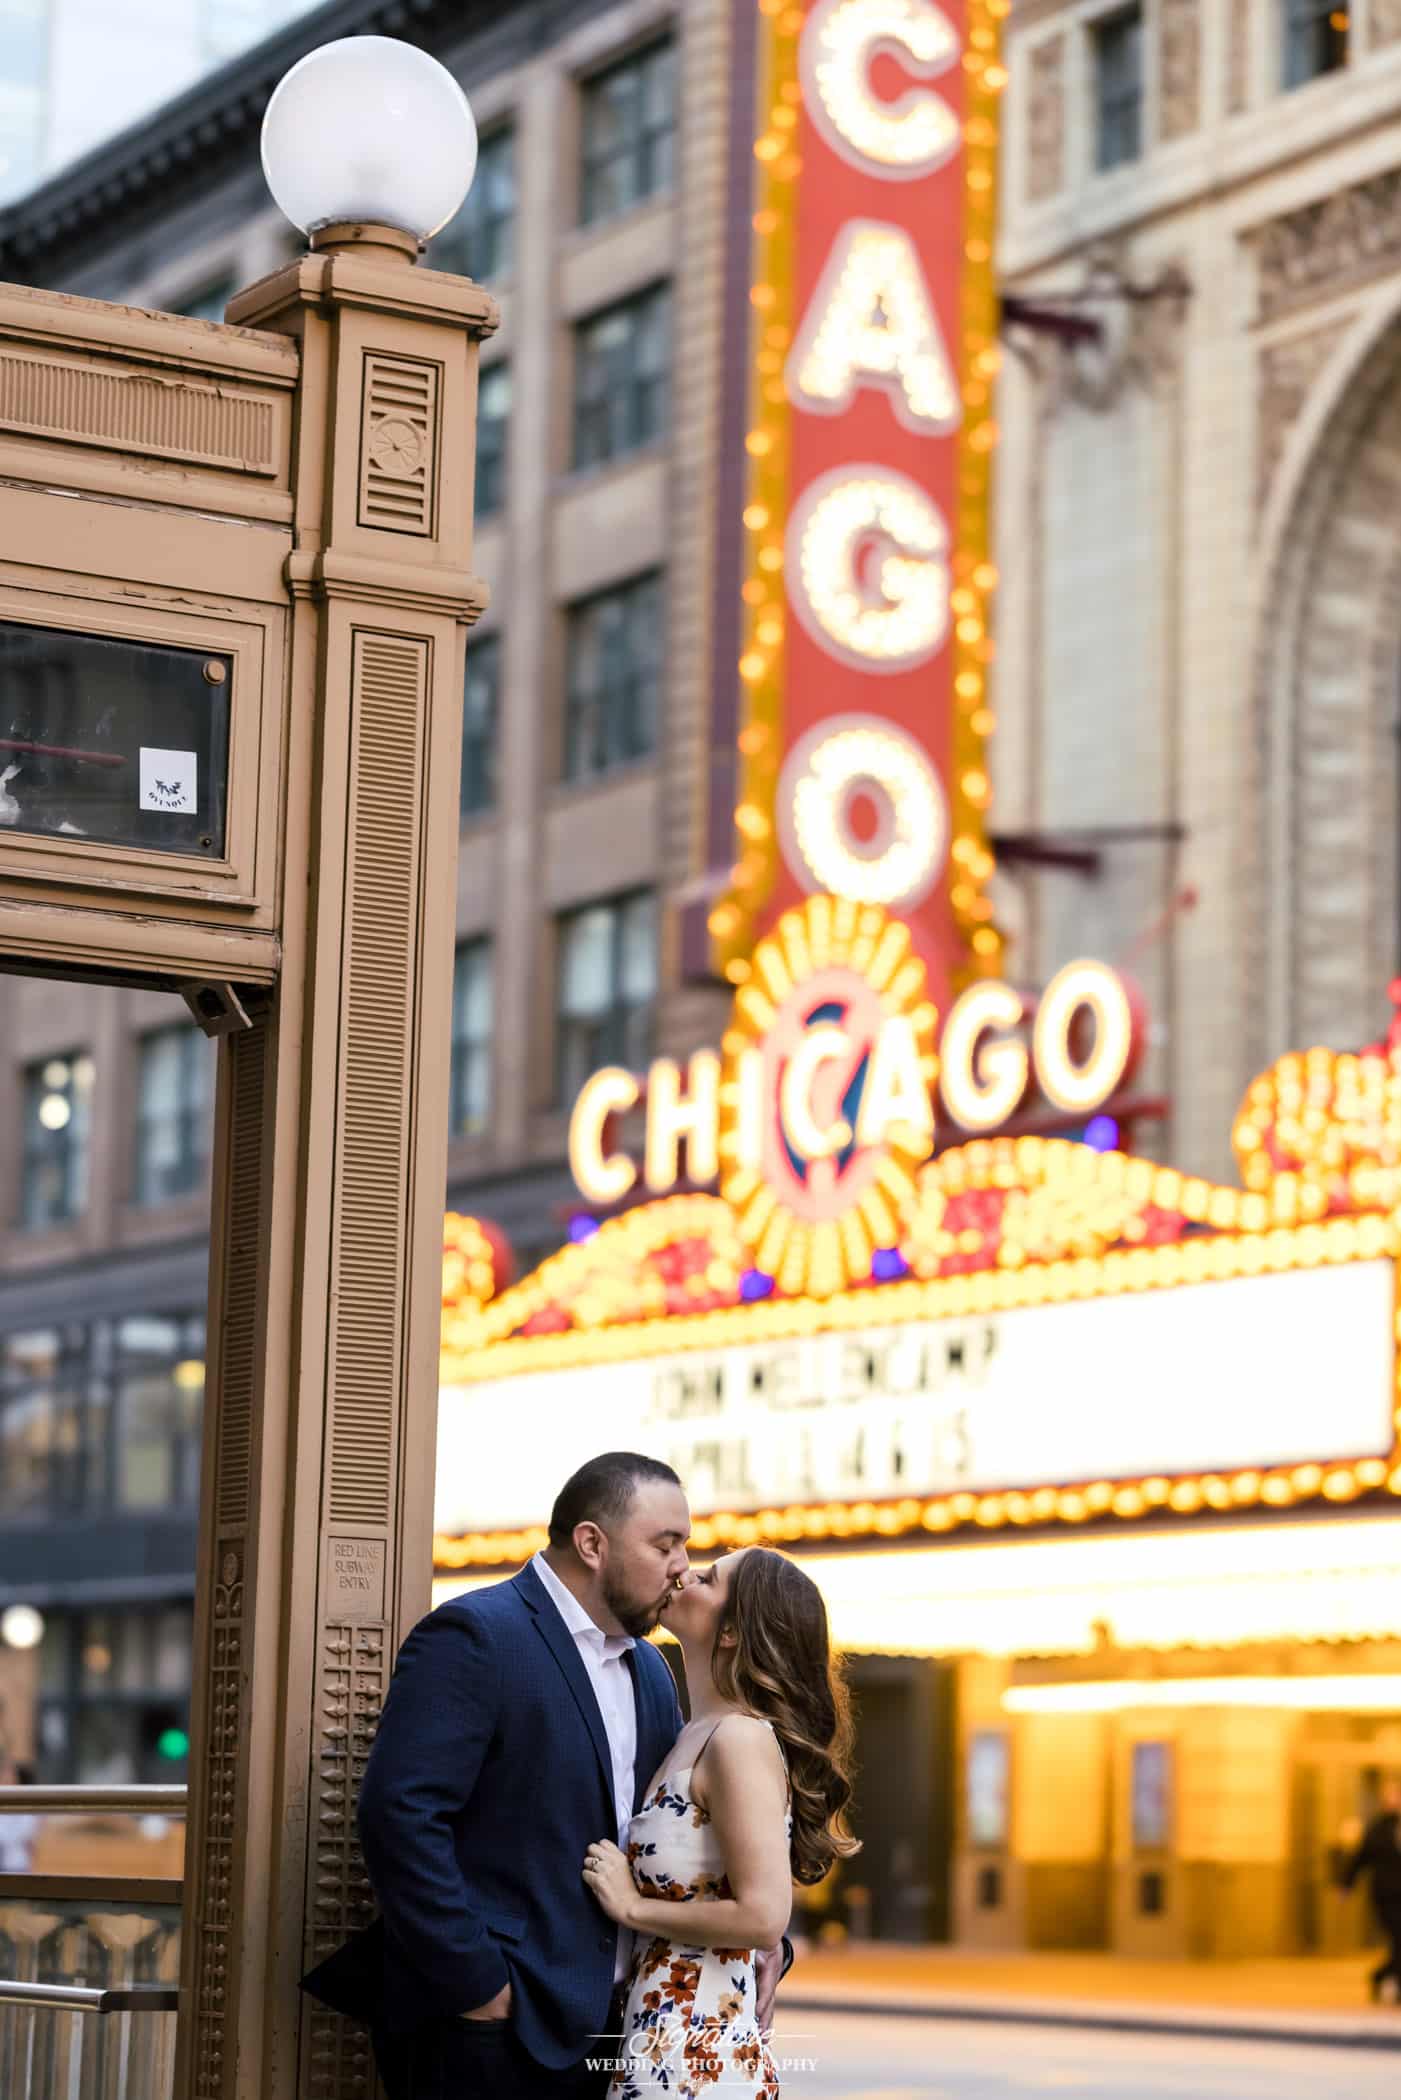 Couple kissing in front of Chicago theater